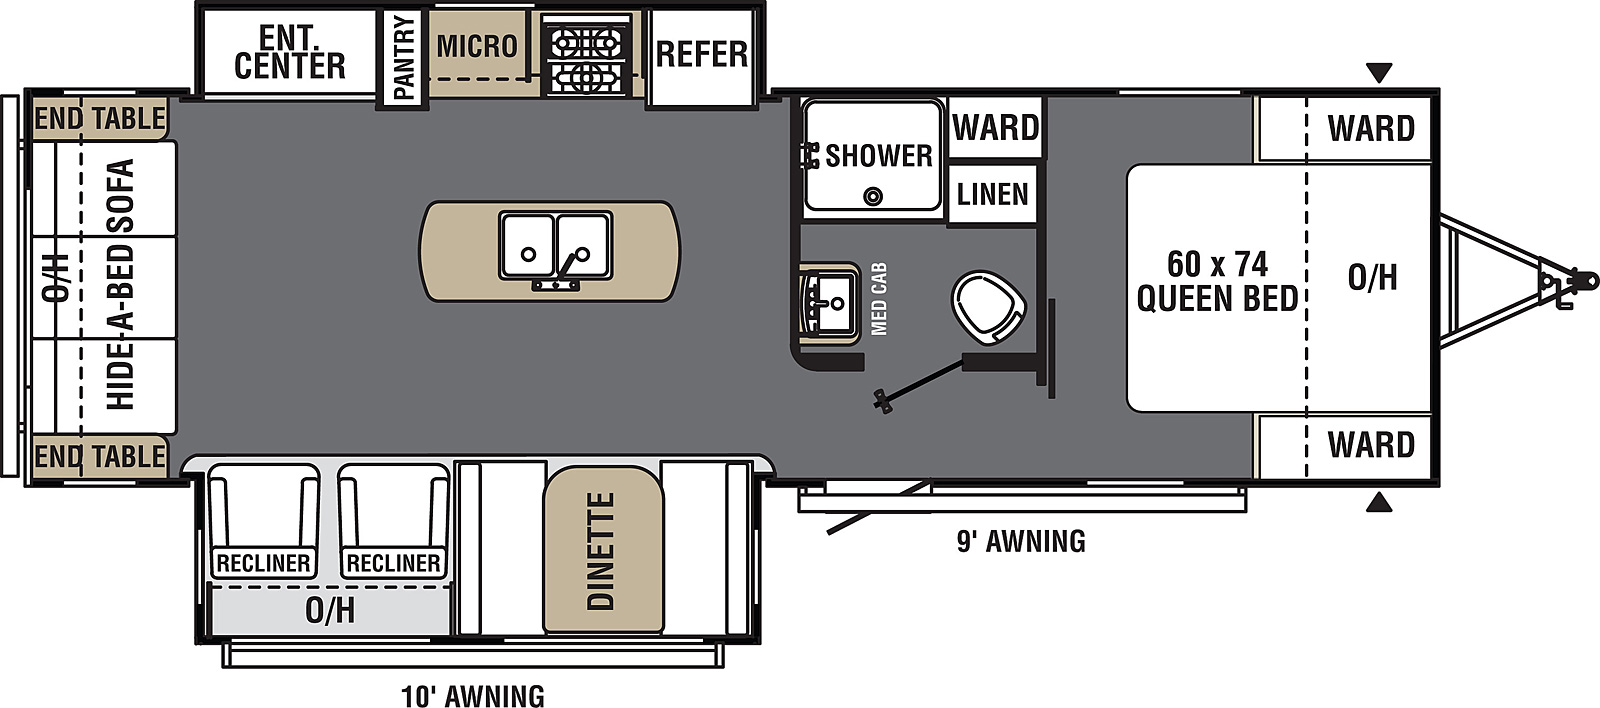 Viking Ultra-Lite 28RLDS floorplan. The 28RLDS has 2 slide outs and one entry door.